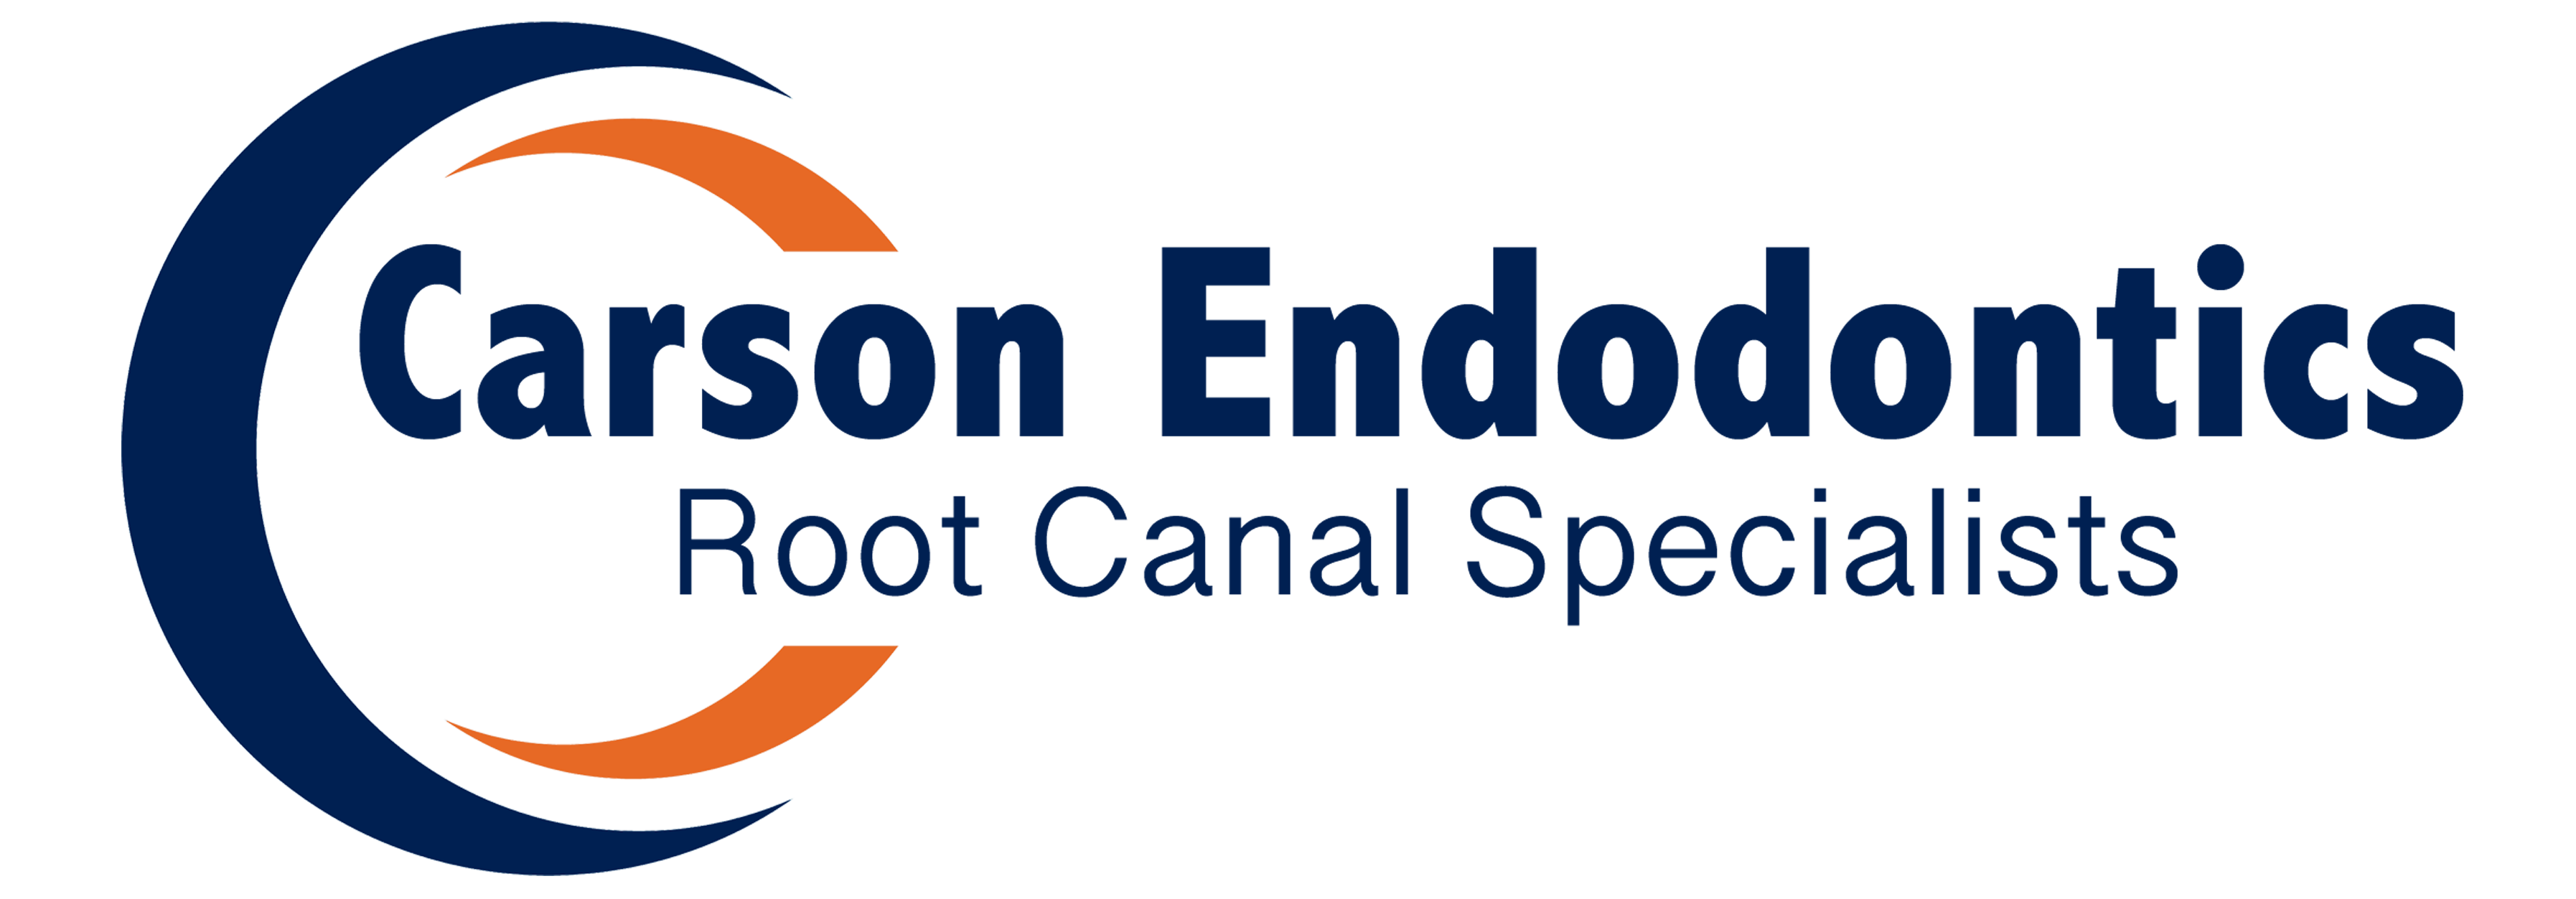 Carson Endodontics in Suffolk Virginia blue and orange logo compressed on the footer